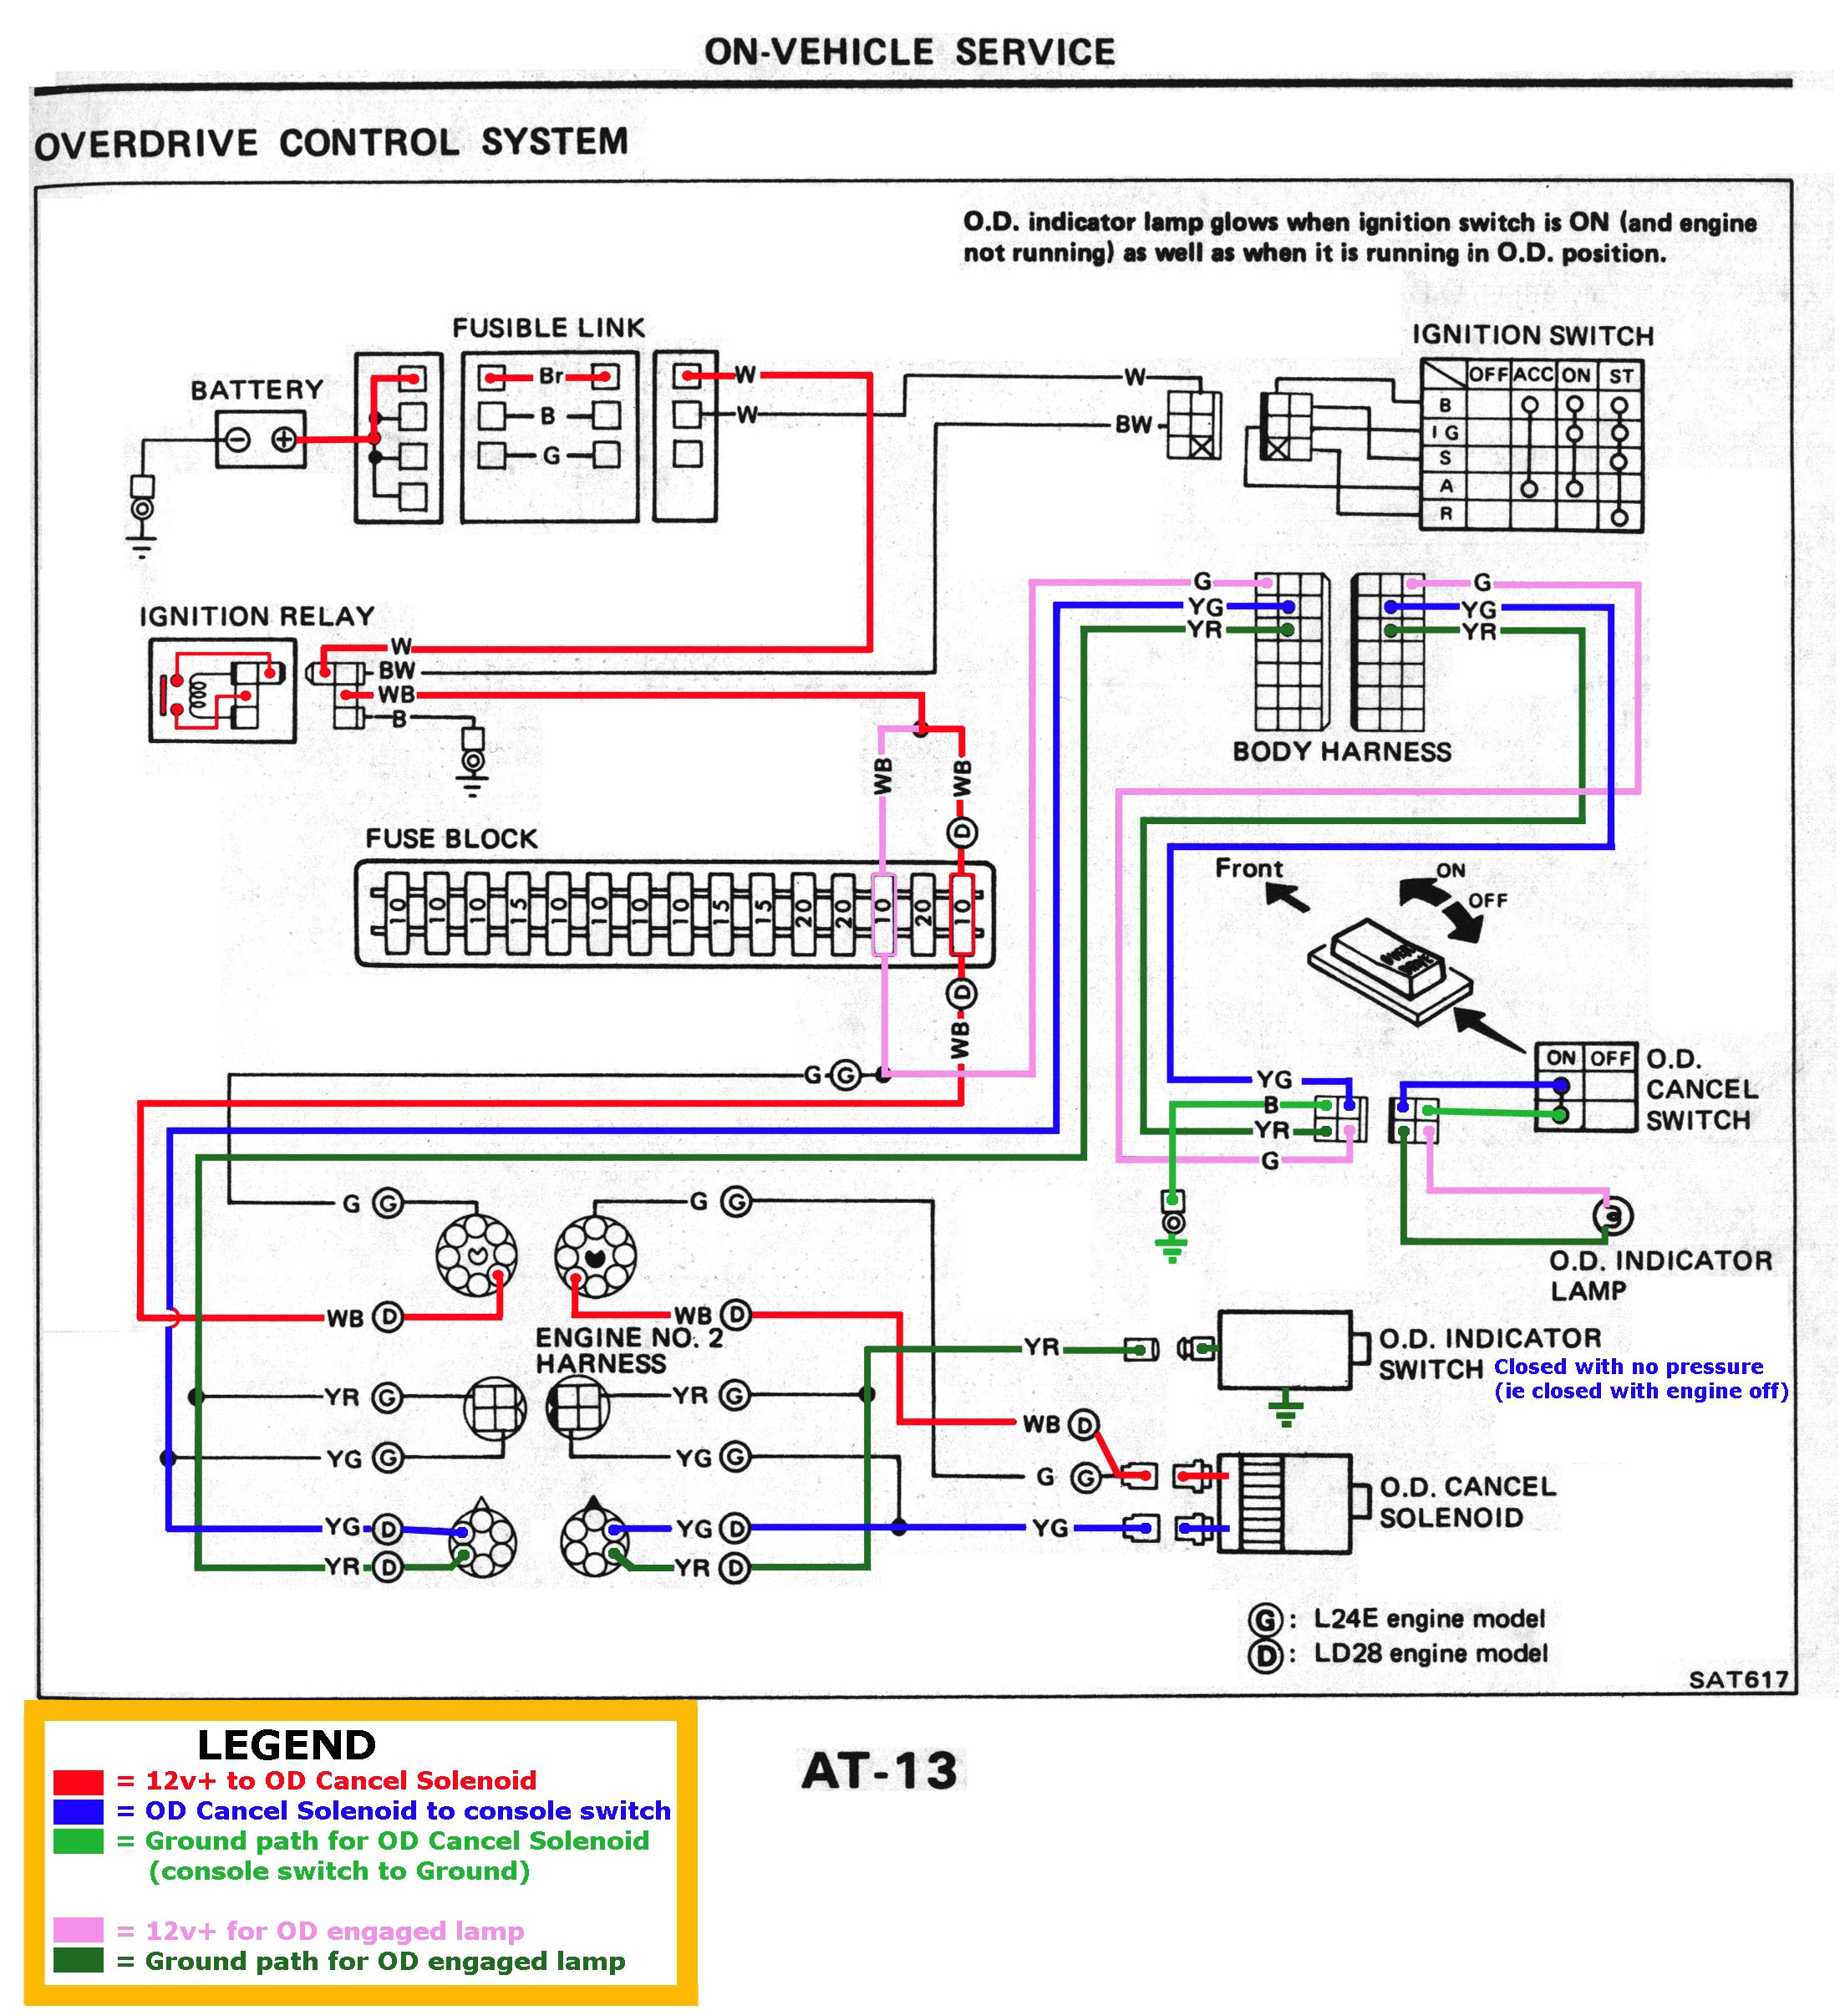 wiring diagram color codes likewise switch and outlet bo wiring on wiring diagram codes wiring diagram